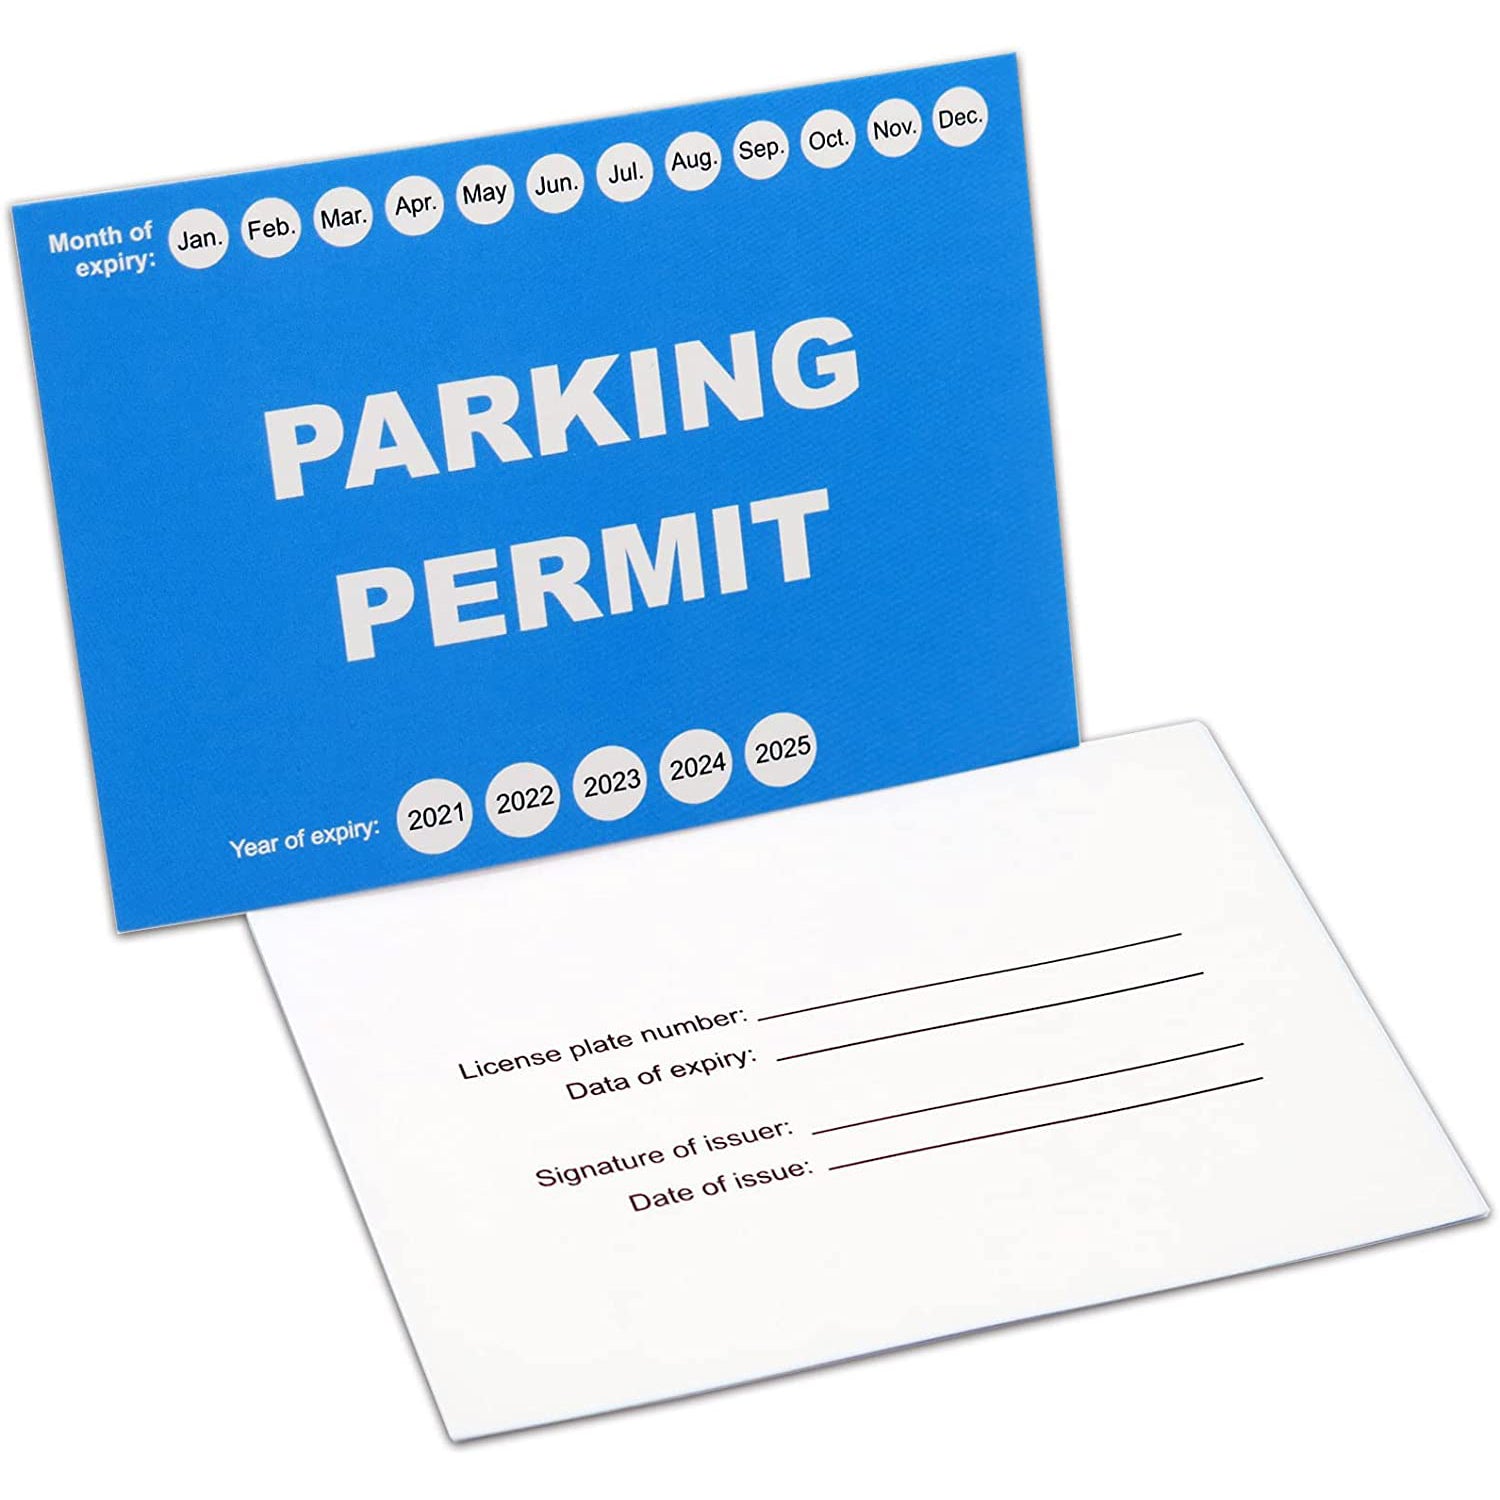 Gialer Parking Permit Card for Car Windshield - Clear Adhesive Parking Tag Pouch - Vinyl Plastic Document Protector